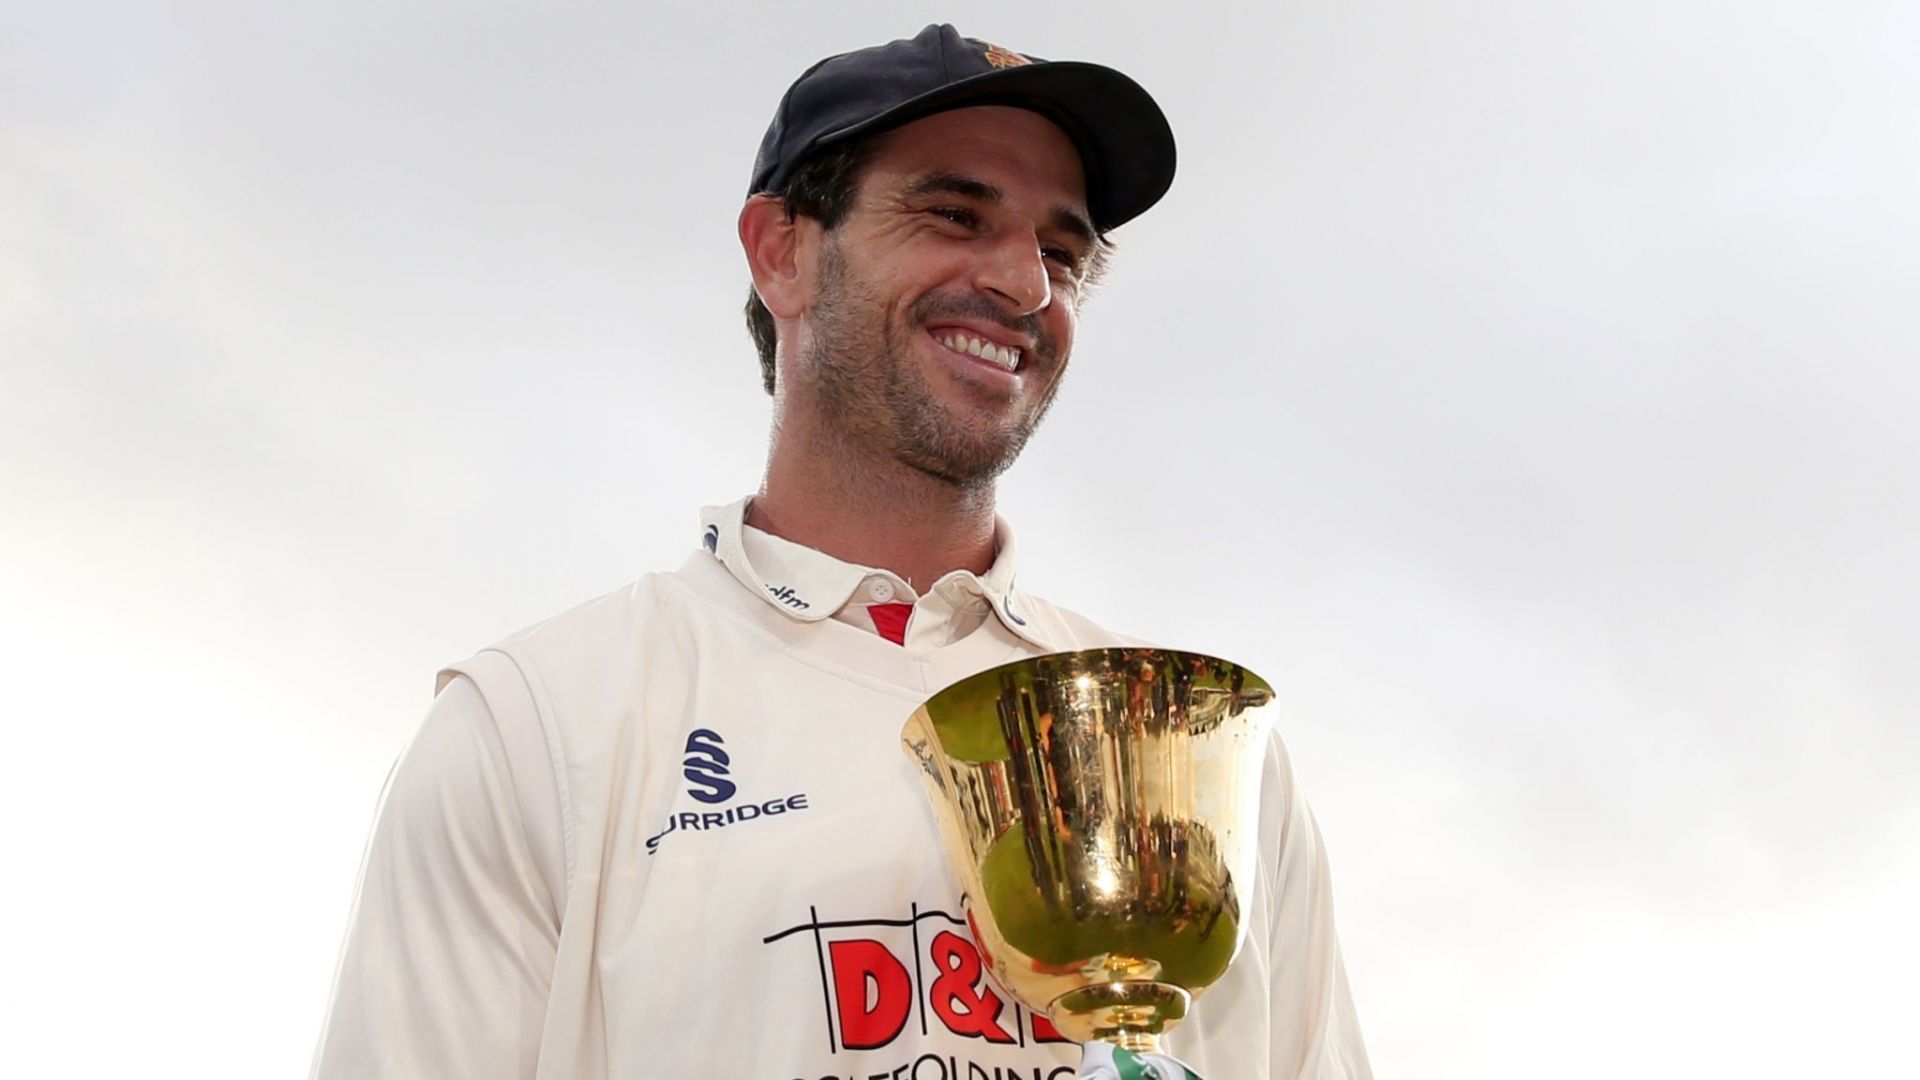 Ryan ten Doeschate was remarkable for Essex, both as a player and captain